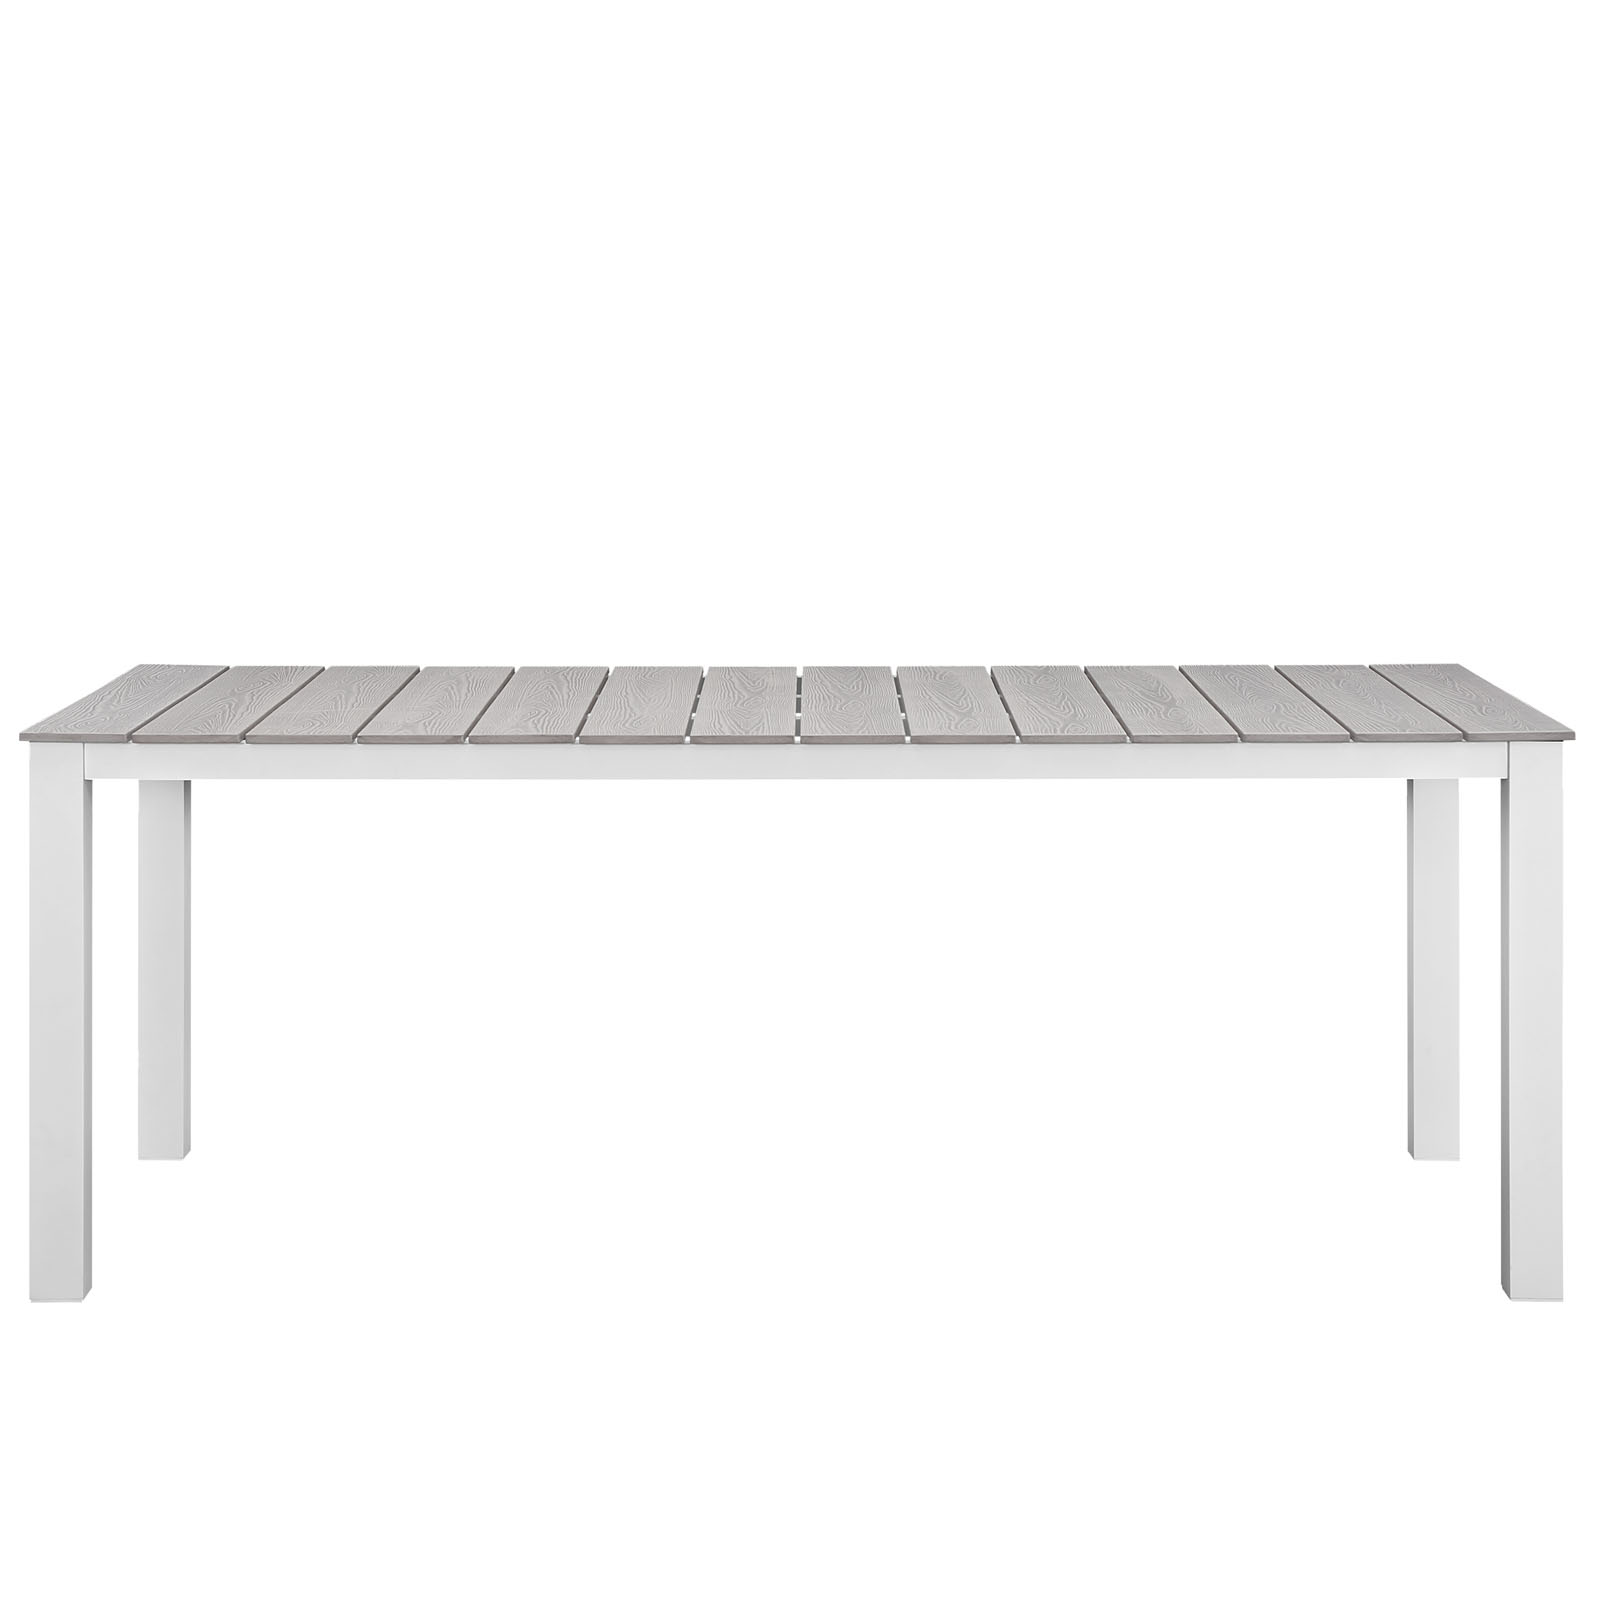 Modway Maine 80" Outdoor Patio Dining Table in White Light Gray - image 4 of 4